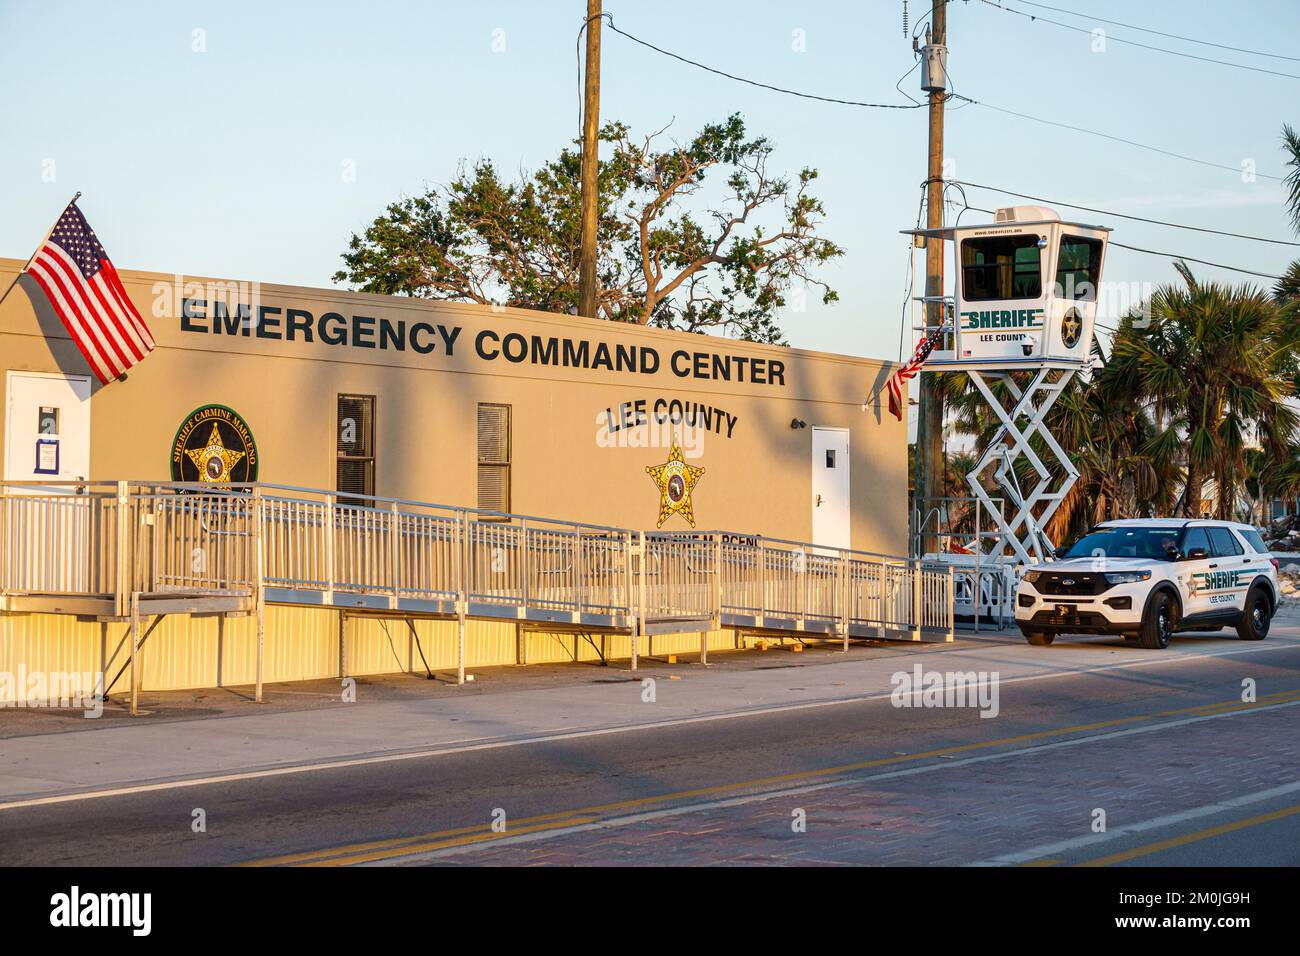 Fort Ft. Myers Beach,Estero Boulevard,Hurricane Ian disaster recovery Lee County Emergency Command center centre,outside exterior front entrance build Stock Photo